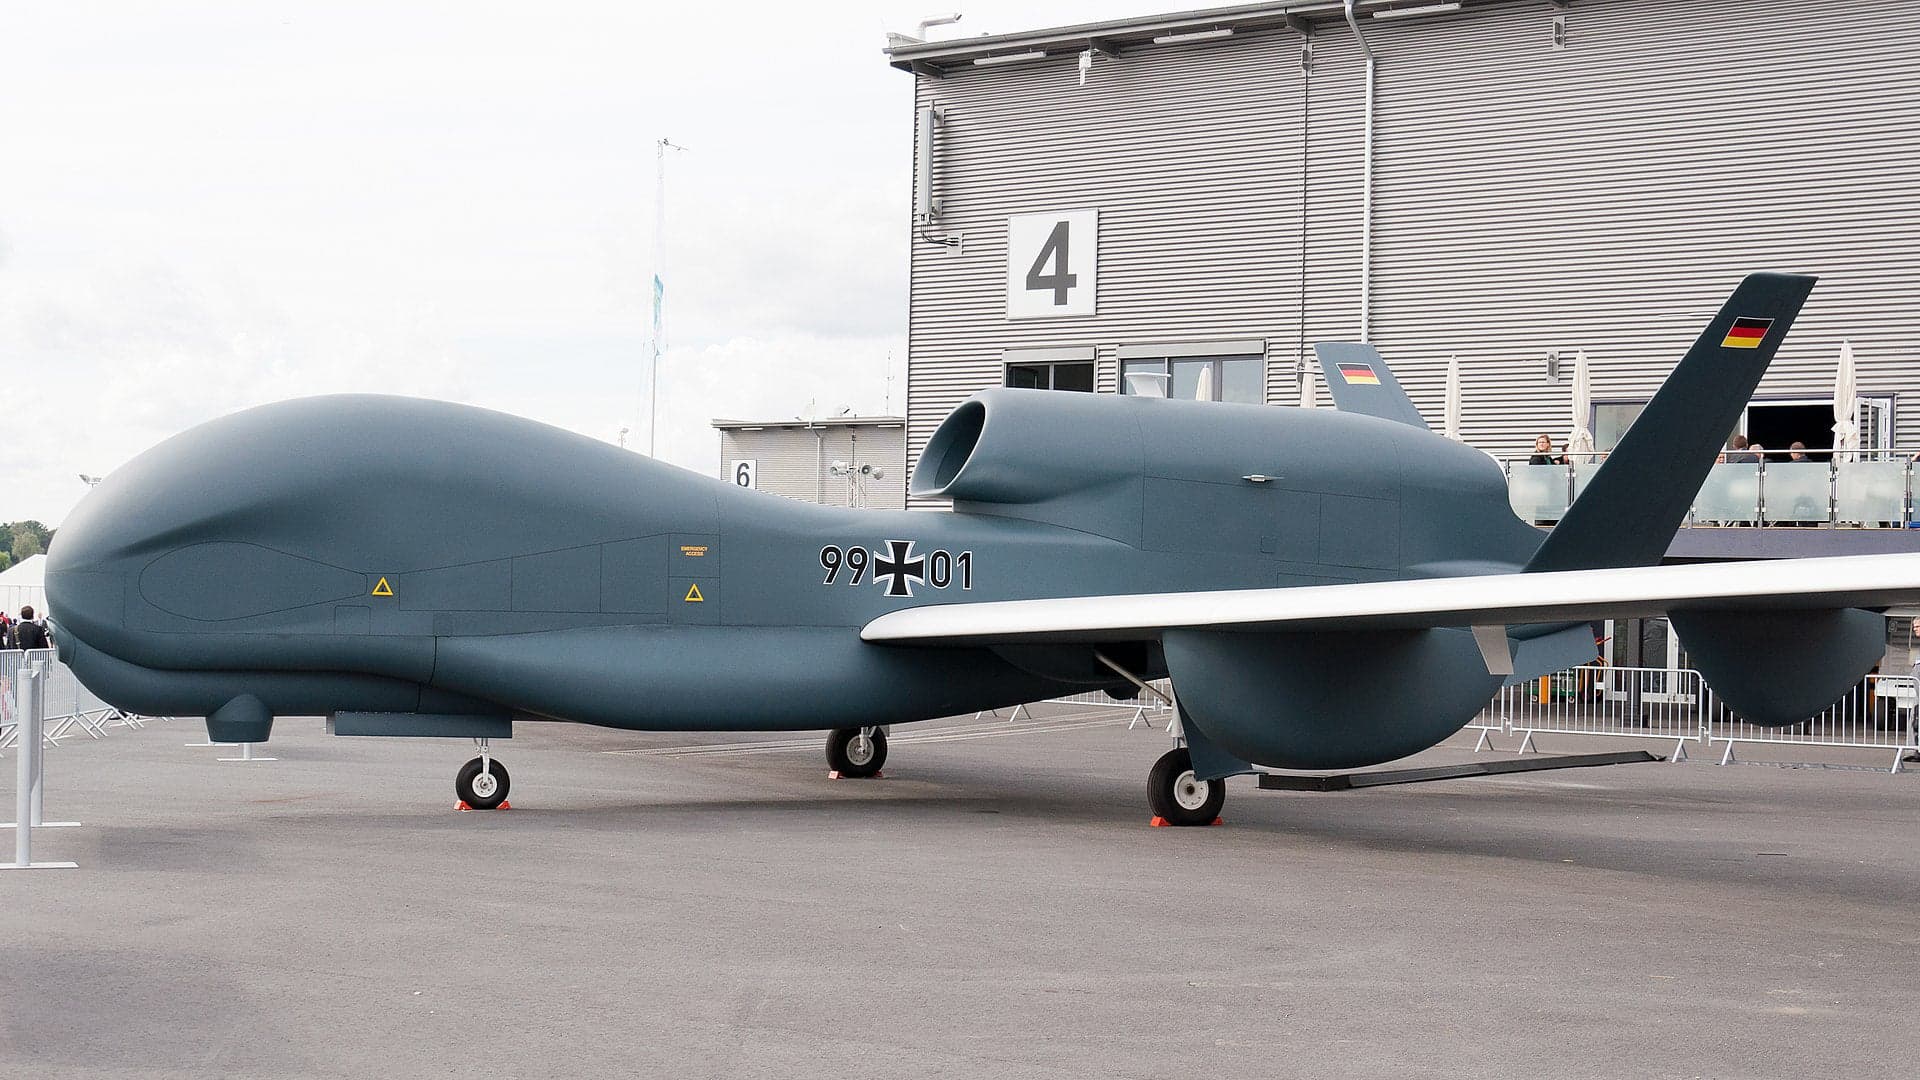 Canada Is Officially Trying To Buy Germany’s Unwanted And Unflyable RQ-4E Euro Hawk Drone